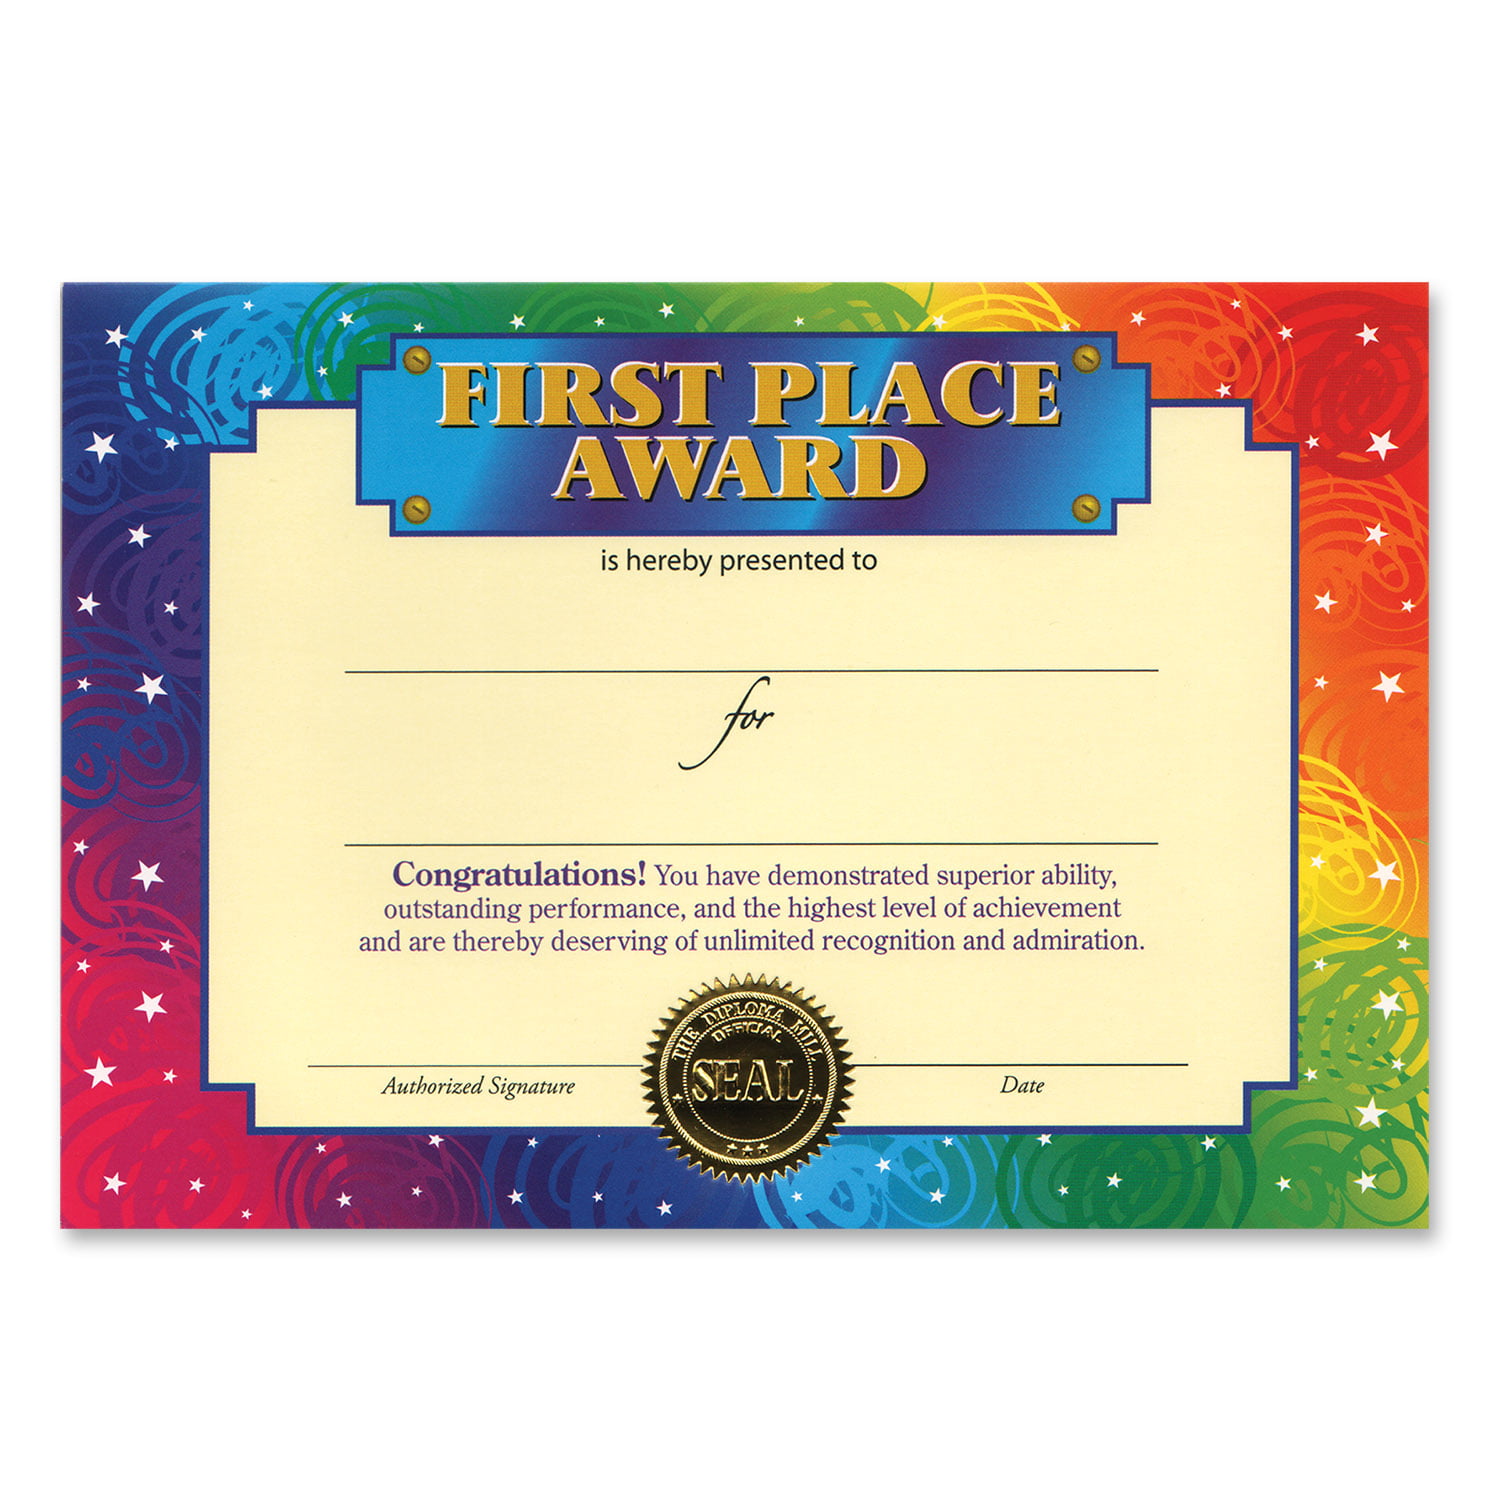 First Place Award Certificate (Pack of 6)